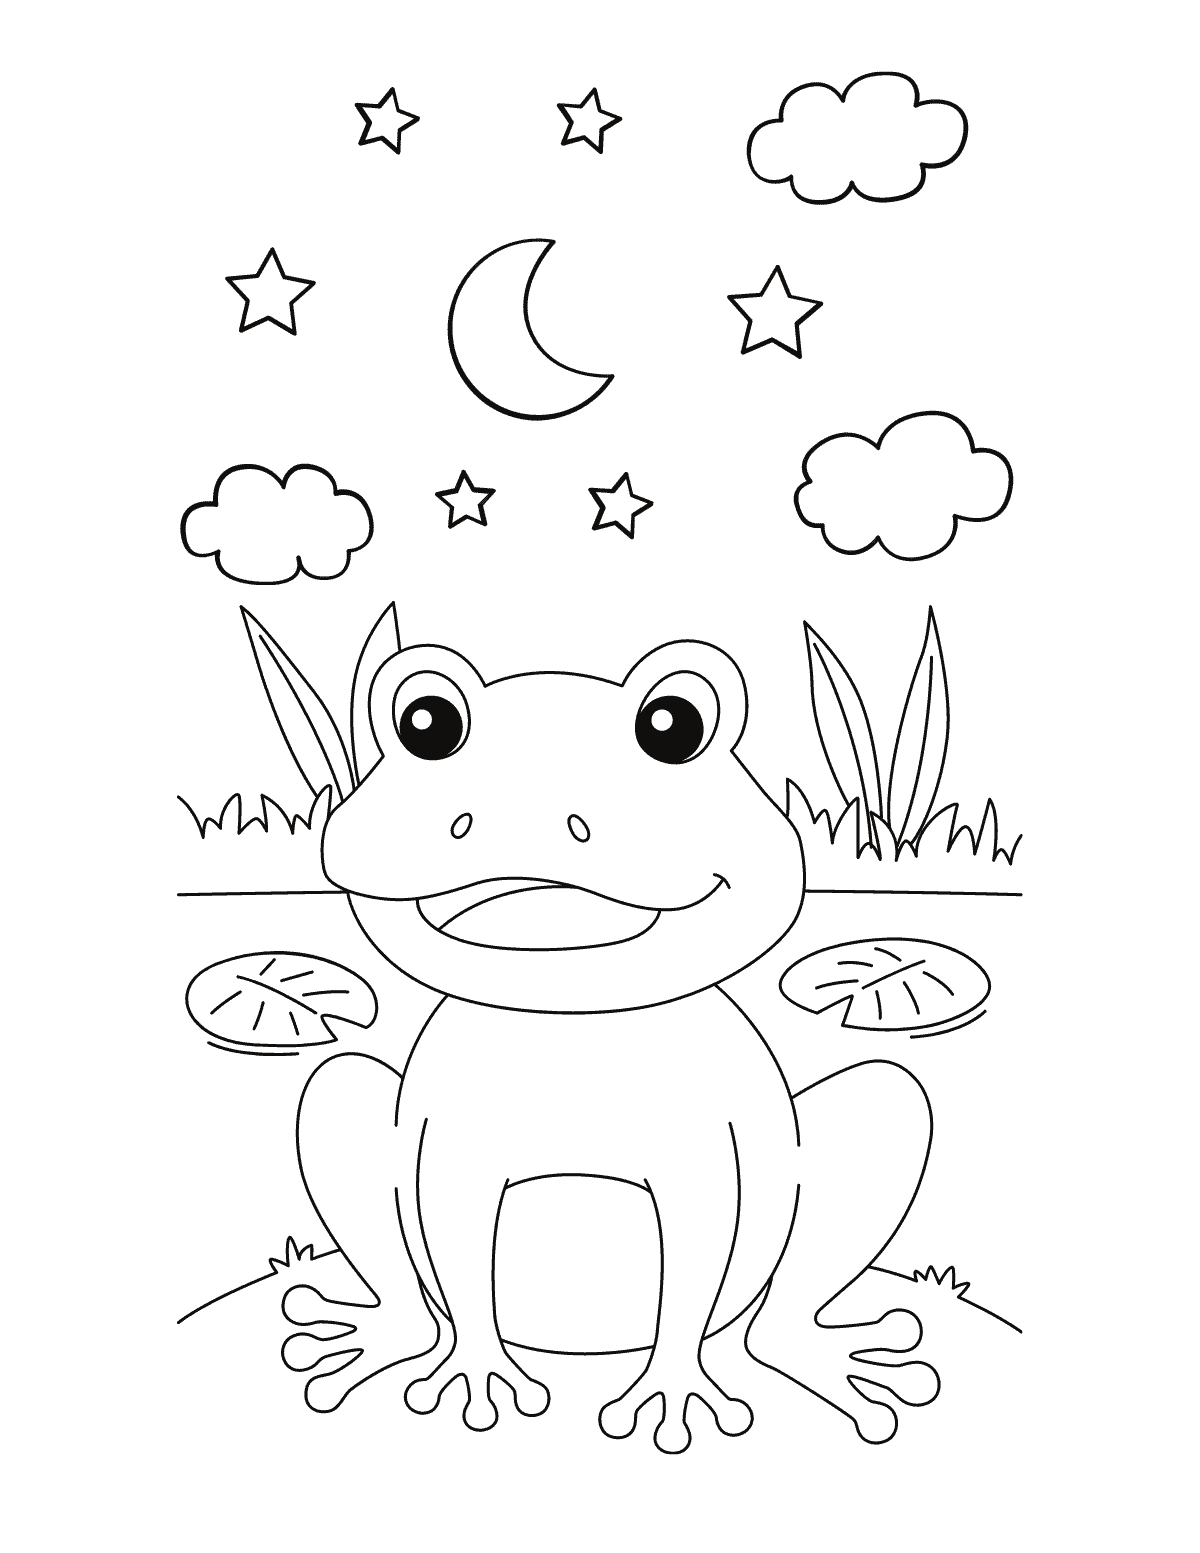 Frog in Pond with Moon and Stars Coloring Page